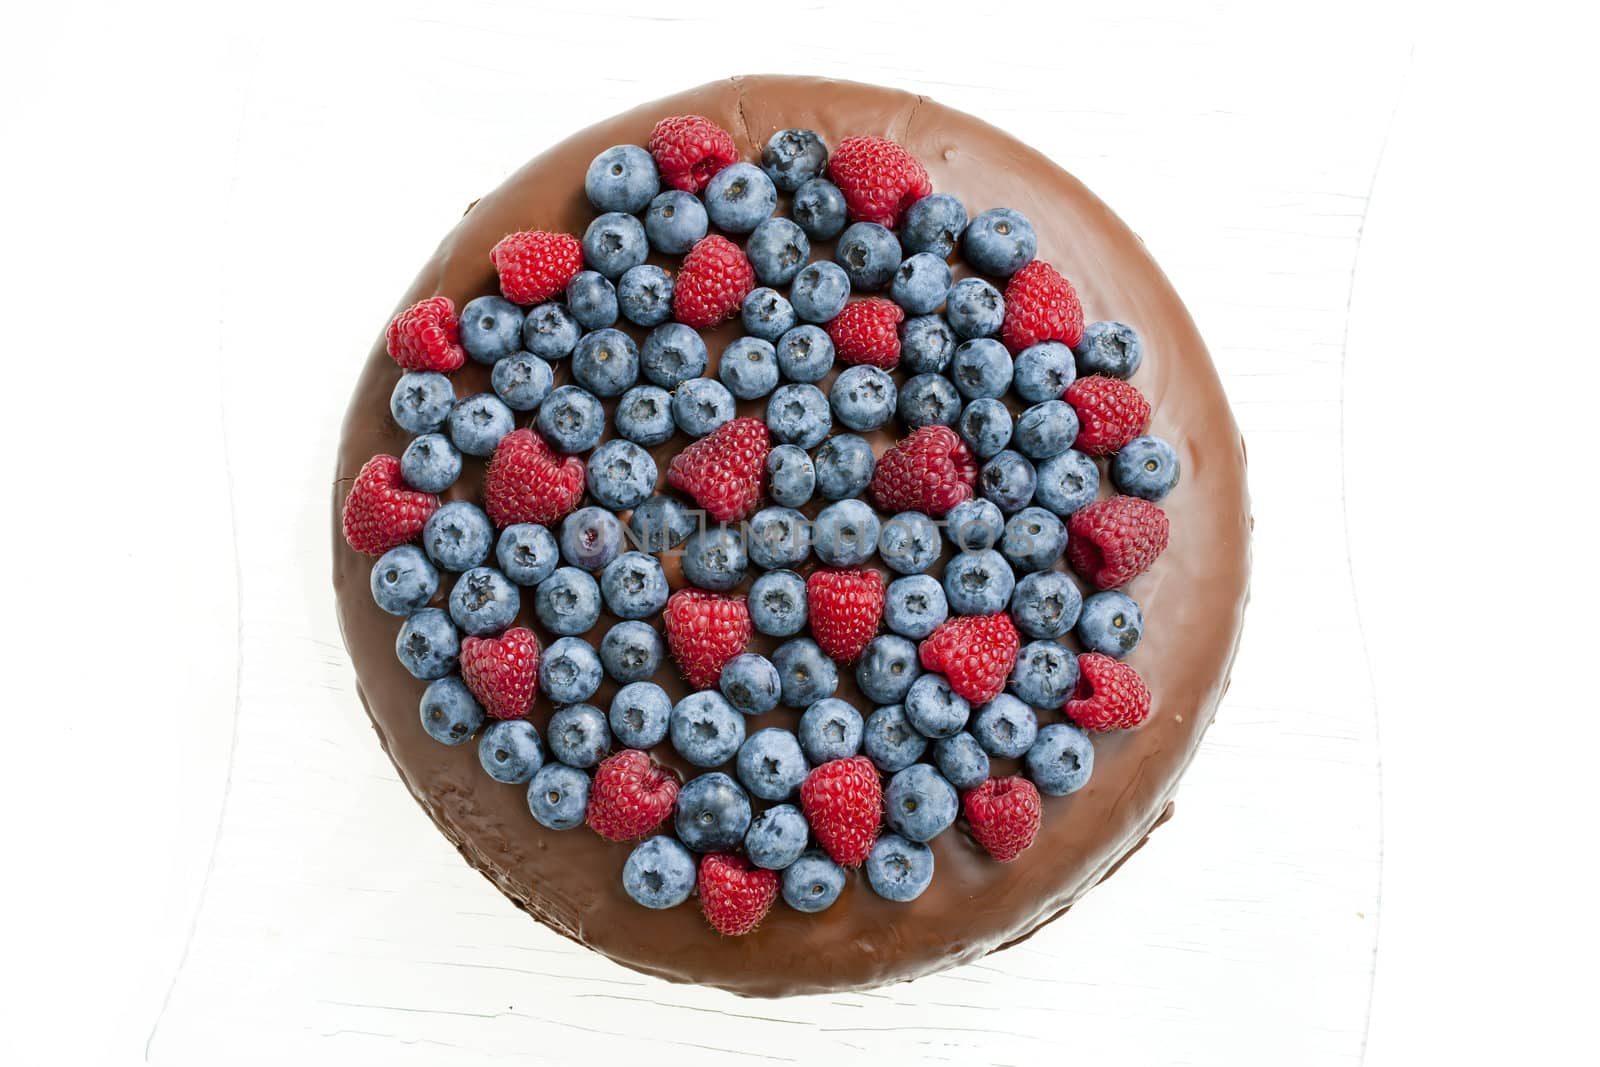 chocolate cake with raspberries and blueberries by phbcz